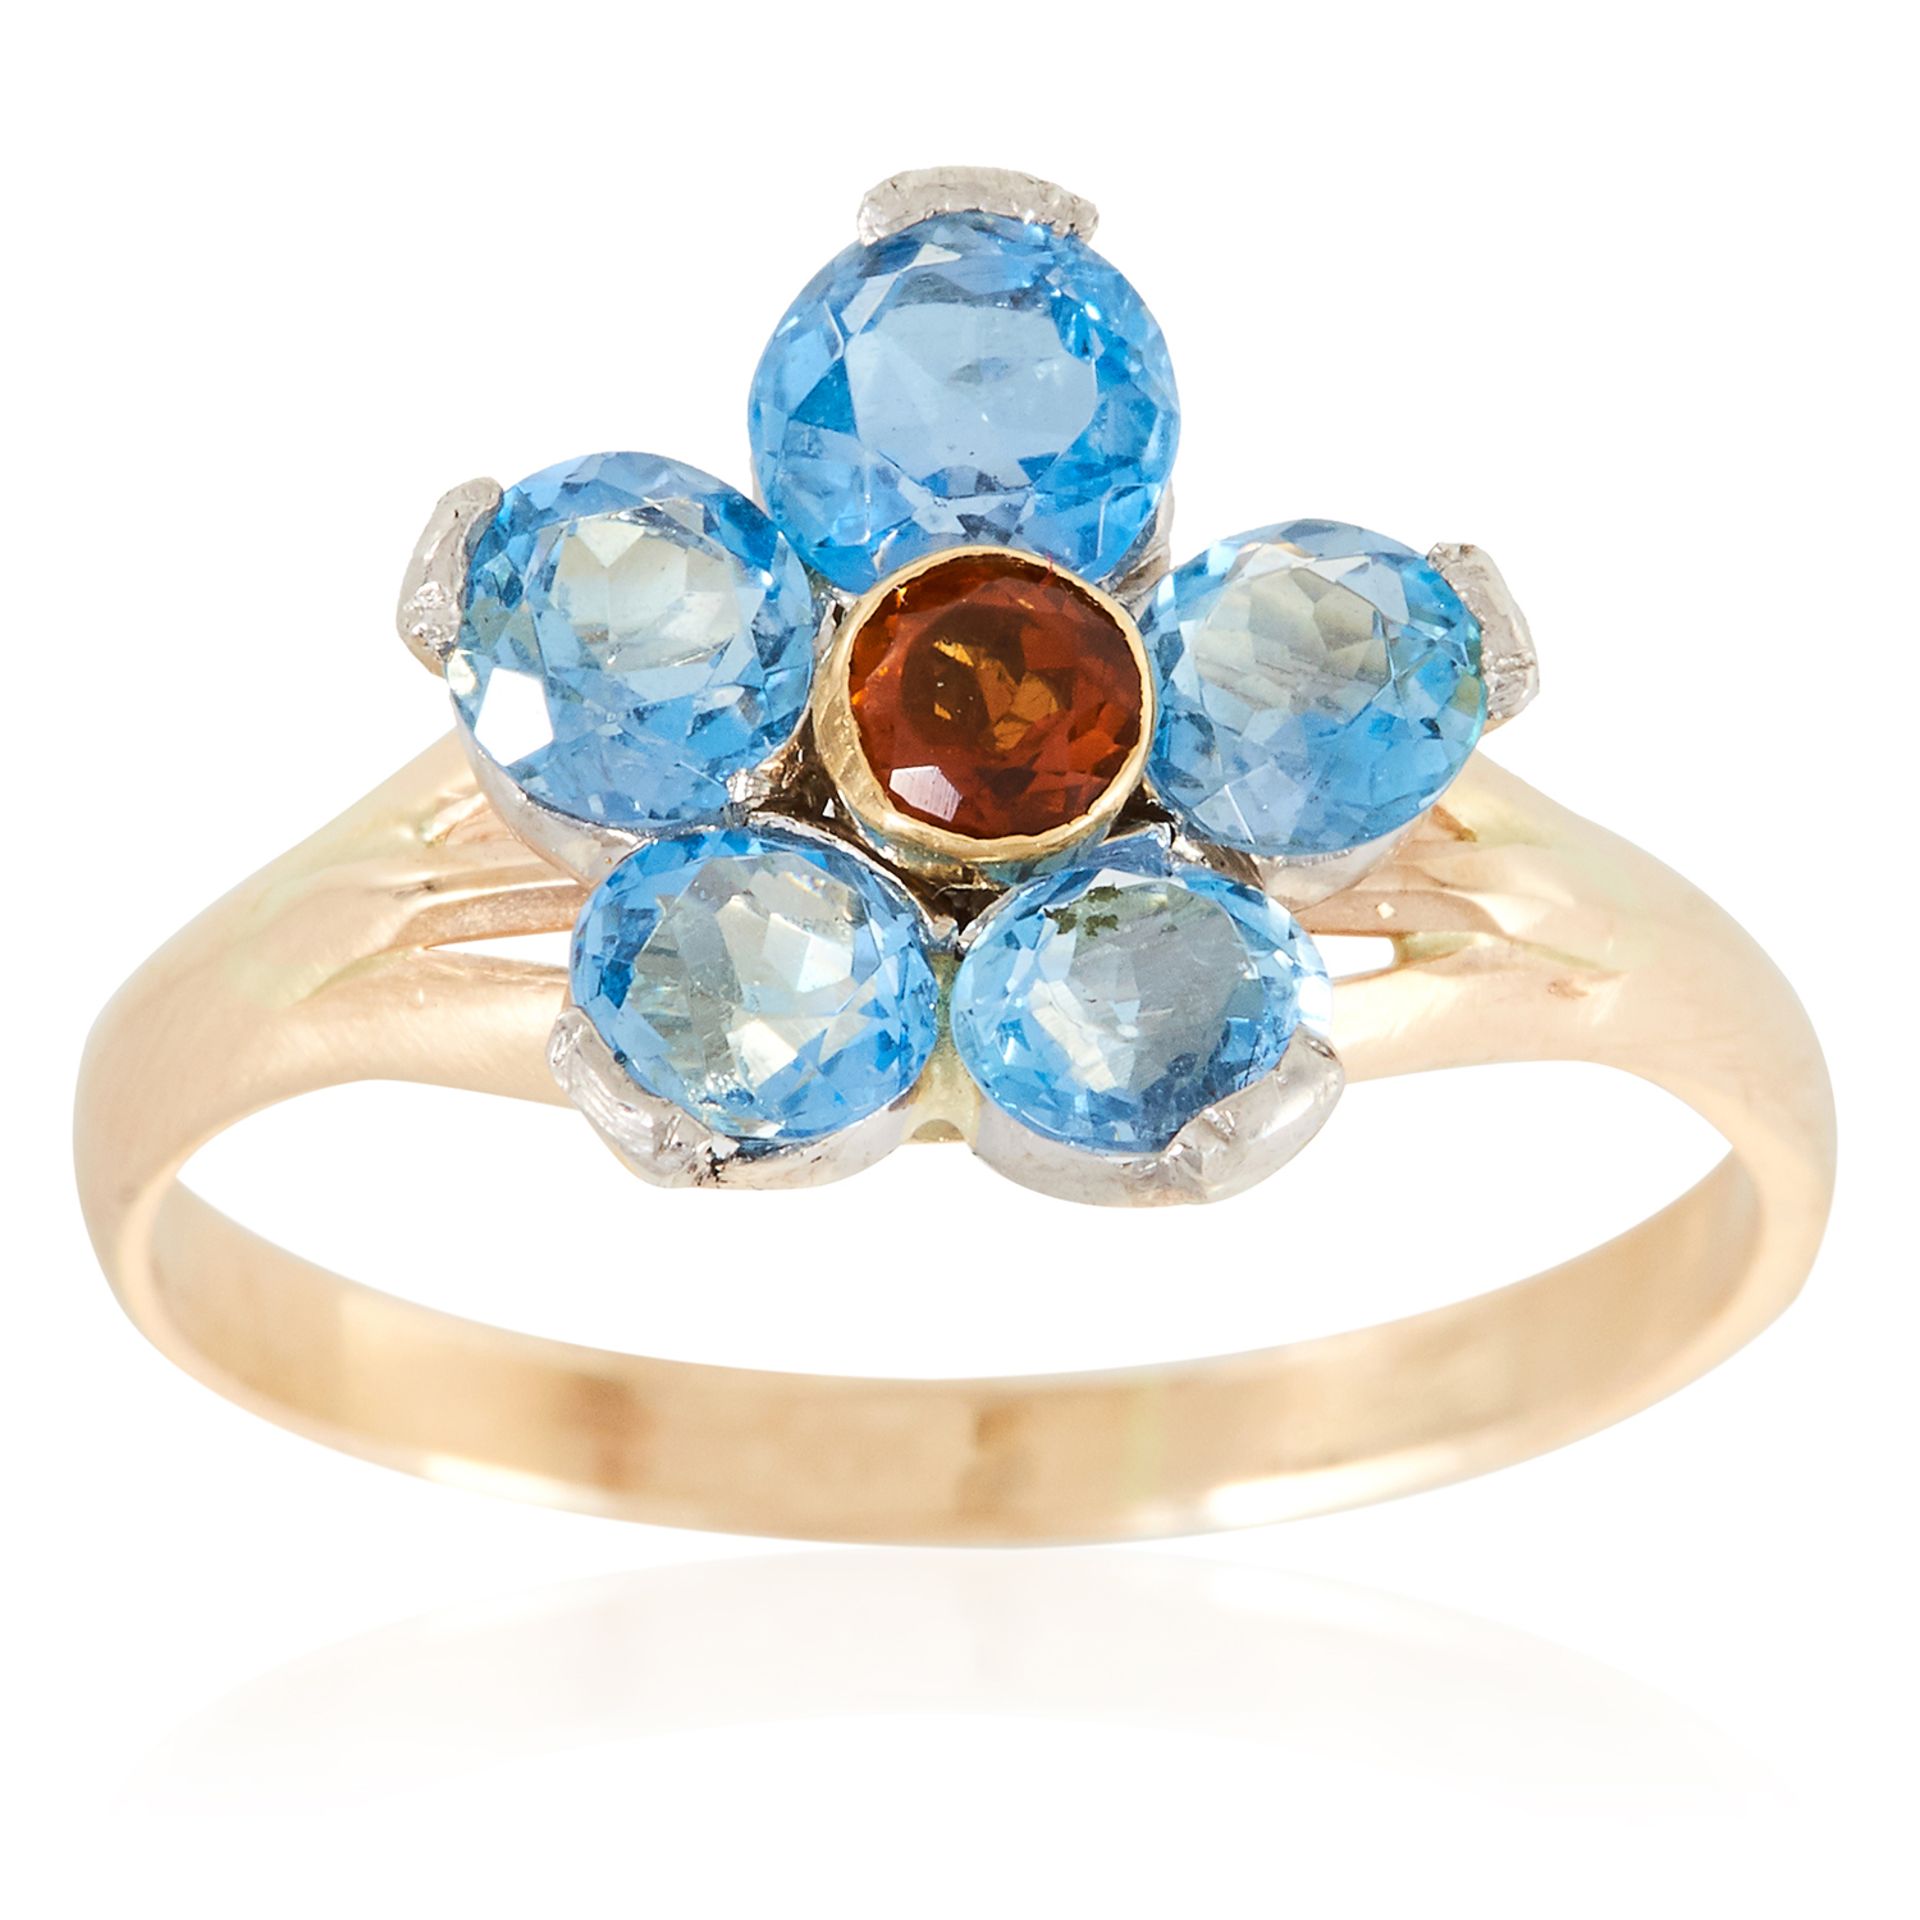 AN AQUAMARINE AND CITRINE DRESS RING in yellow gold, depicting a flower set with round cut